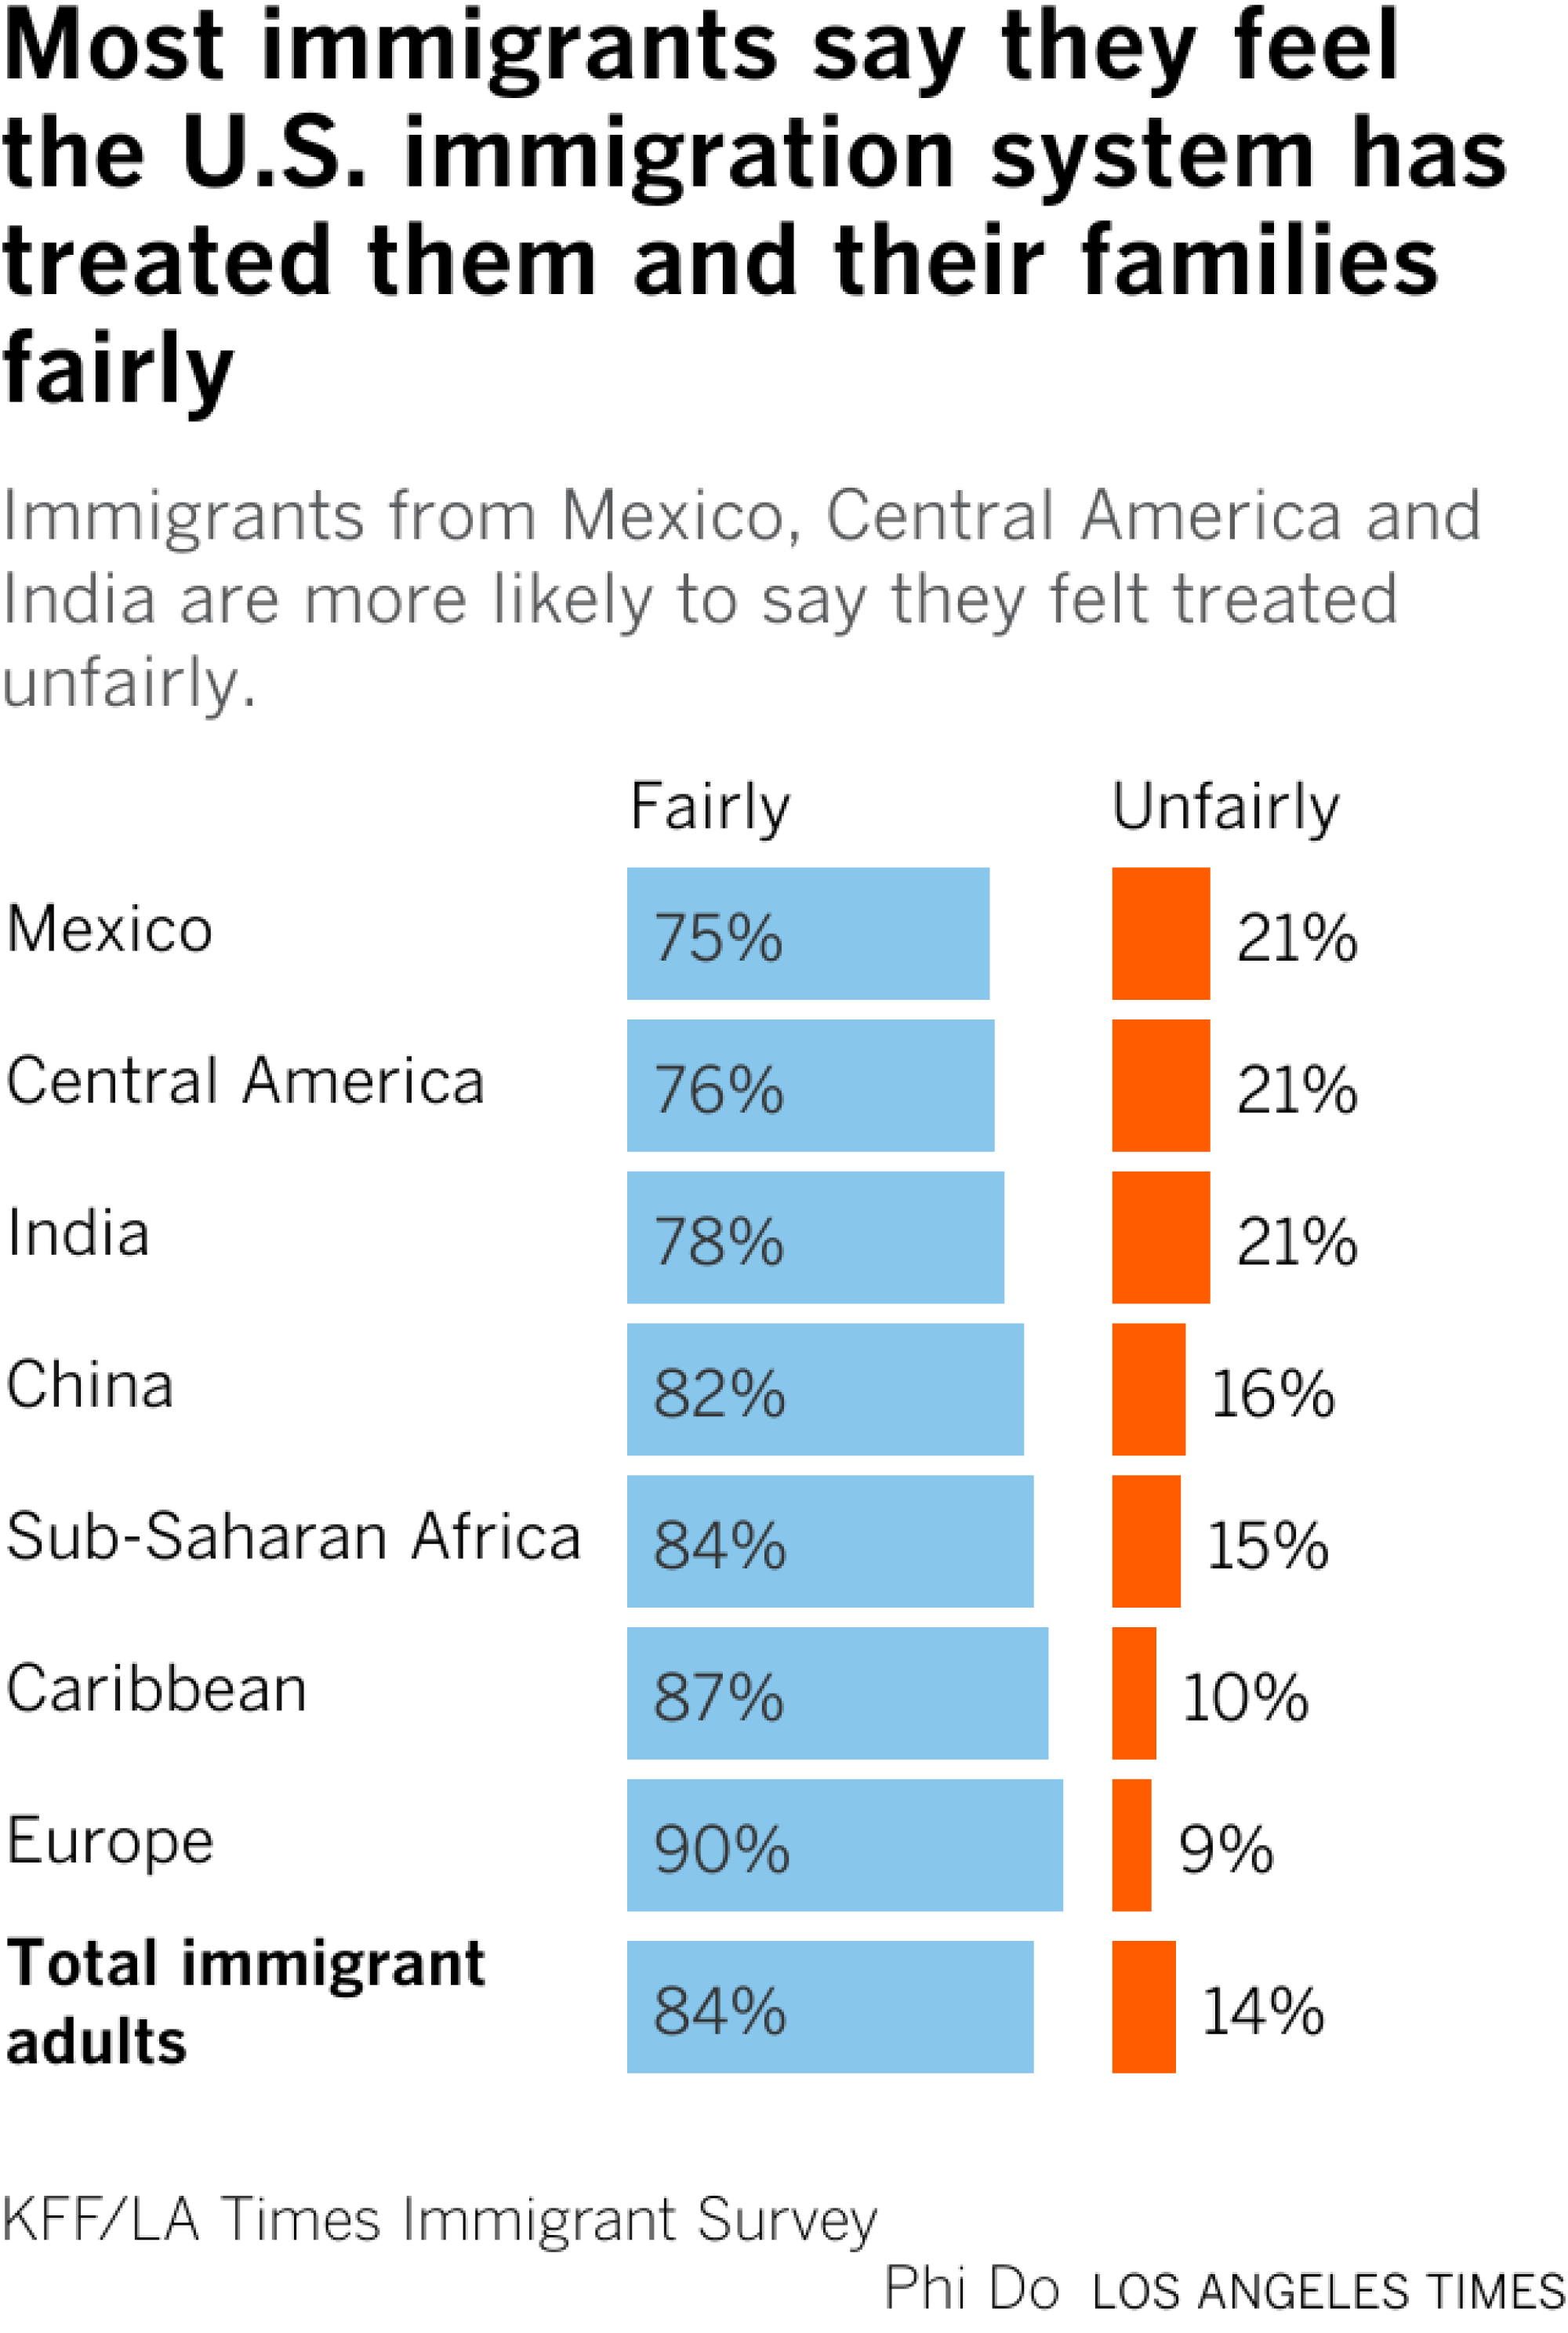 Split bar chart showing whether immigrants feel the U.S. immigration system has treated them and their families fairly, broken down by country/region of origin. 